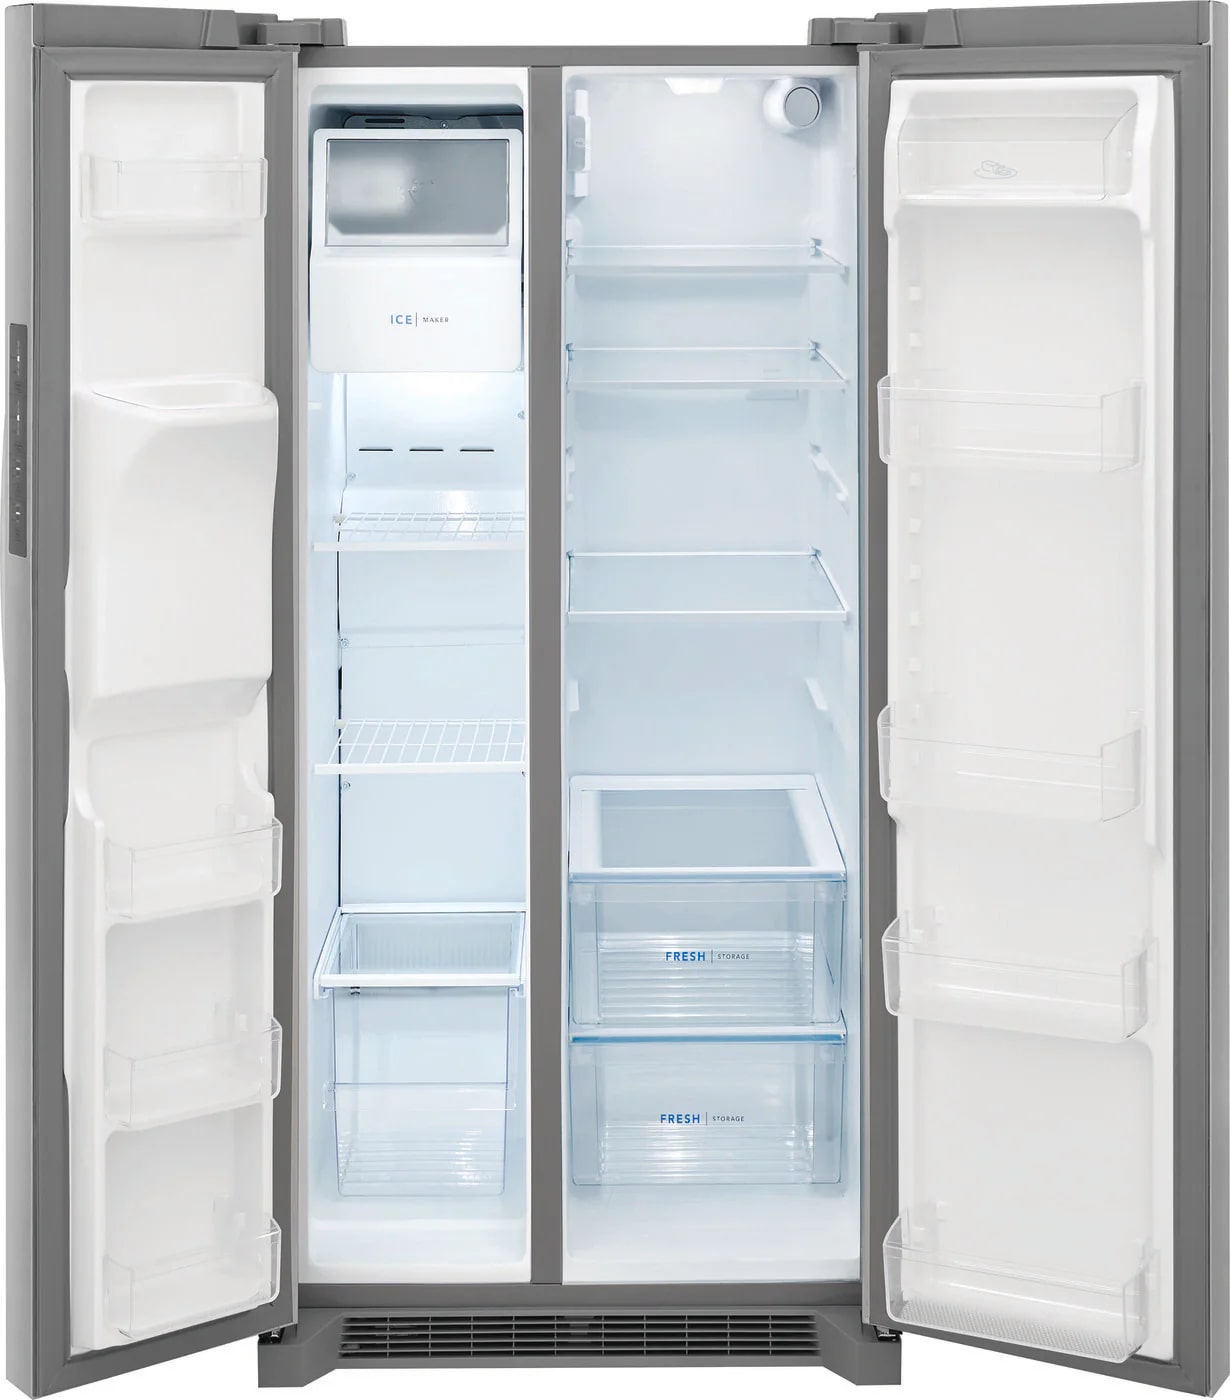 Frigidaire - 33.125 Inch 22.3 cu. ft Side by Side Refrigerator in Stainless - FRSS2323AS